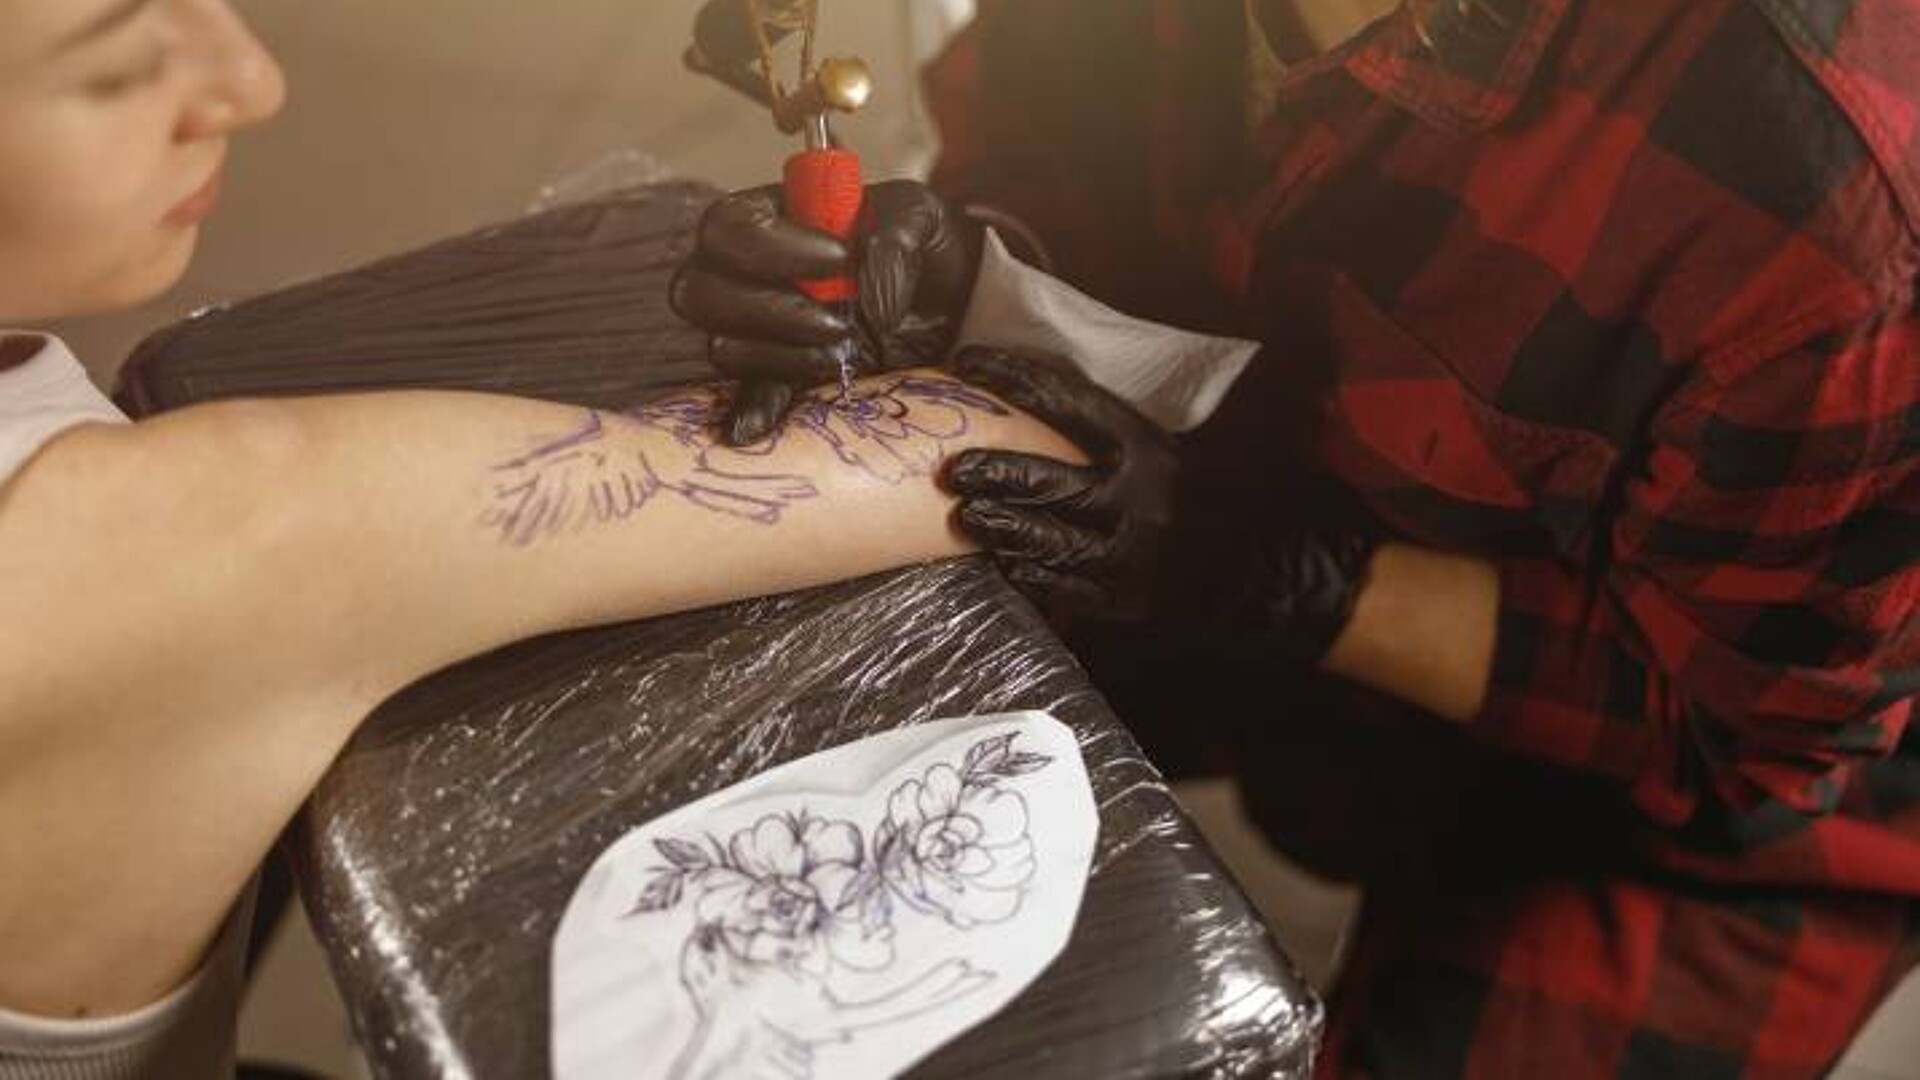 How Much Should You Tip a Tattoo Artist?, Spending